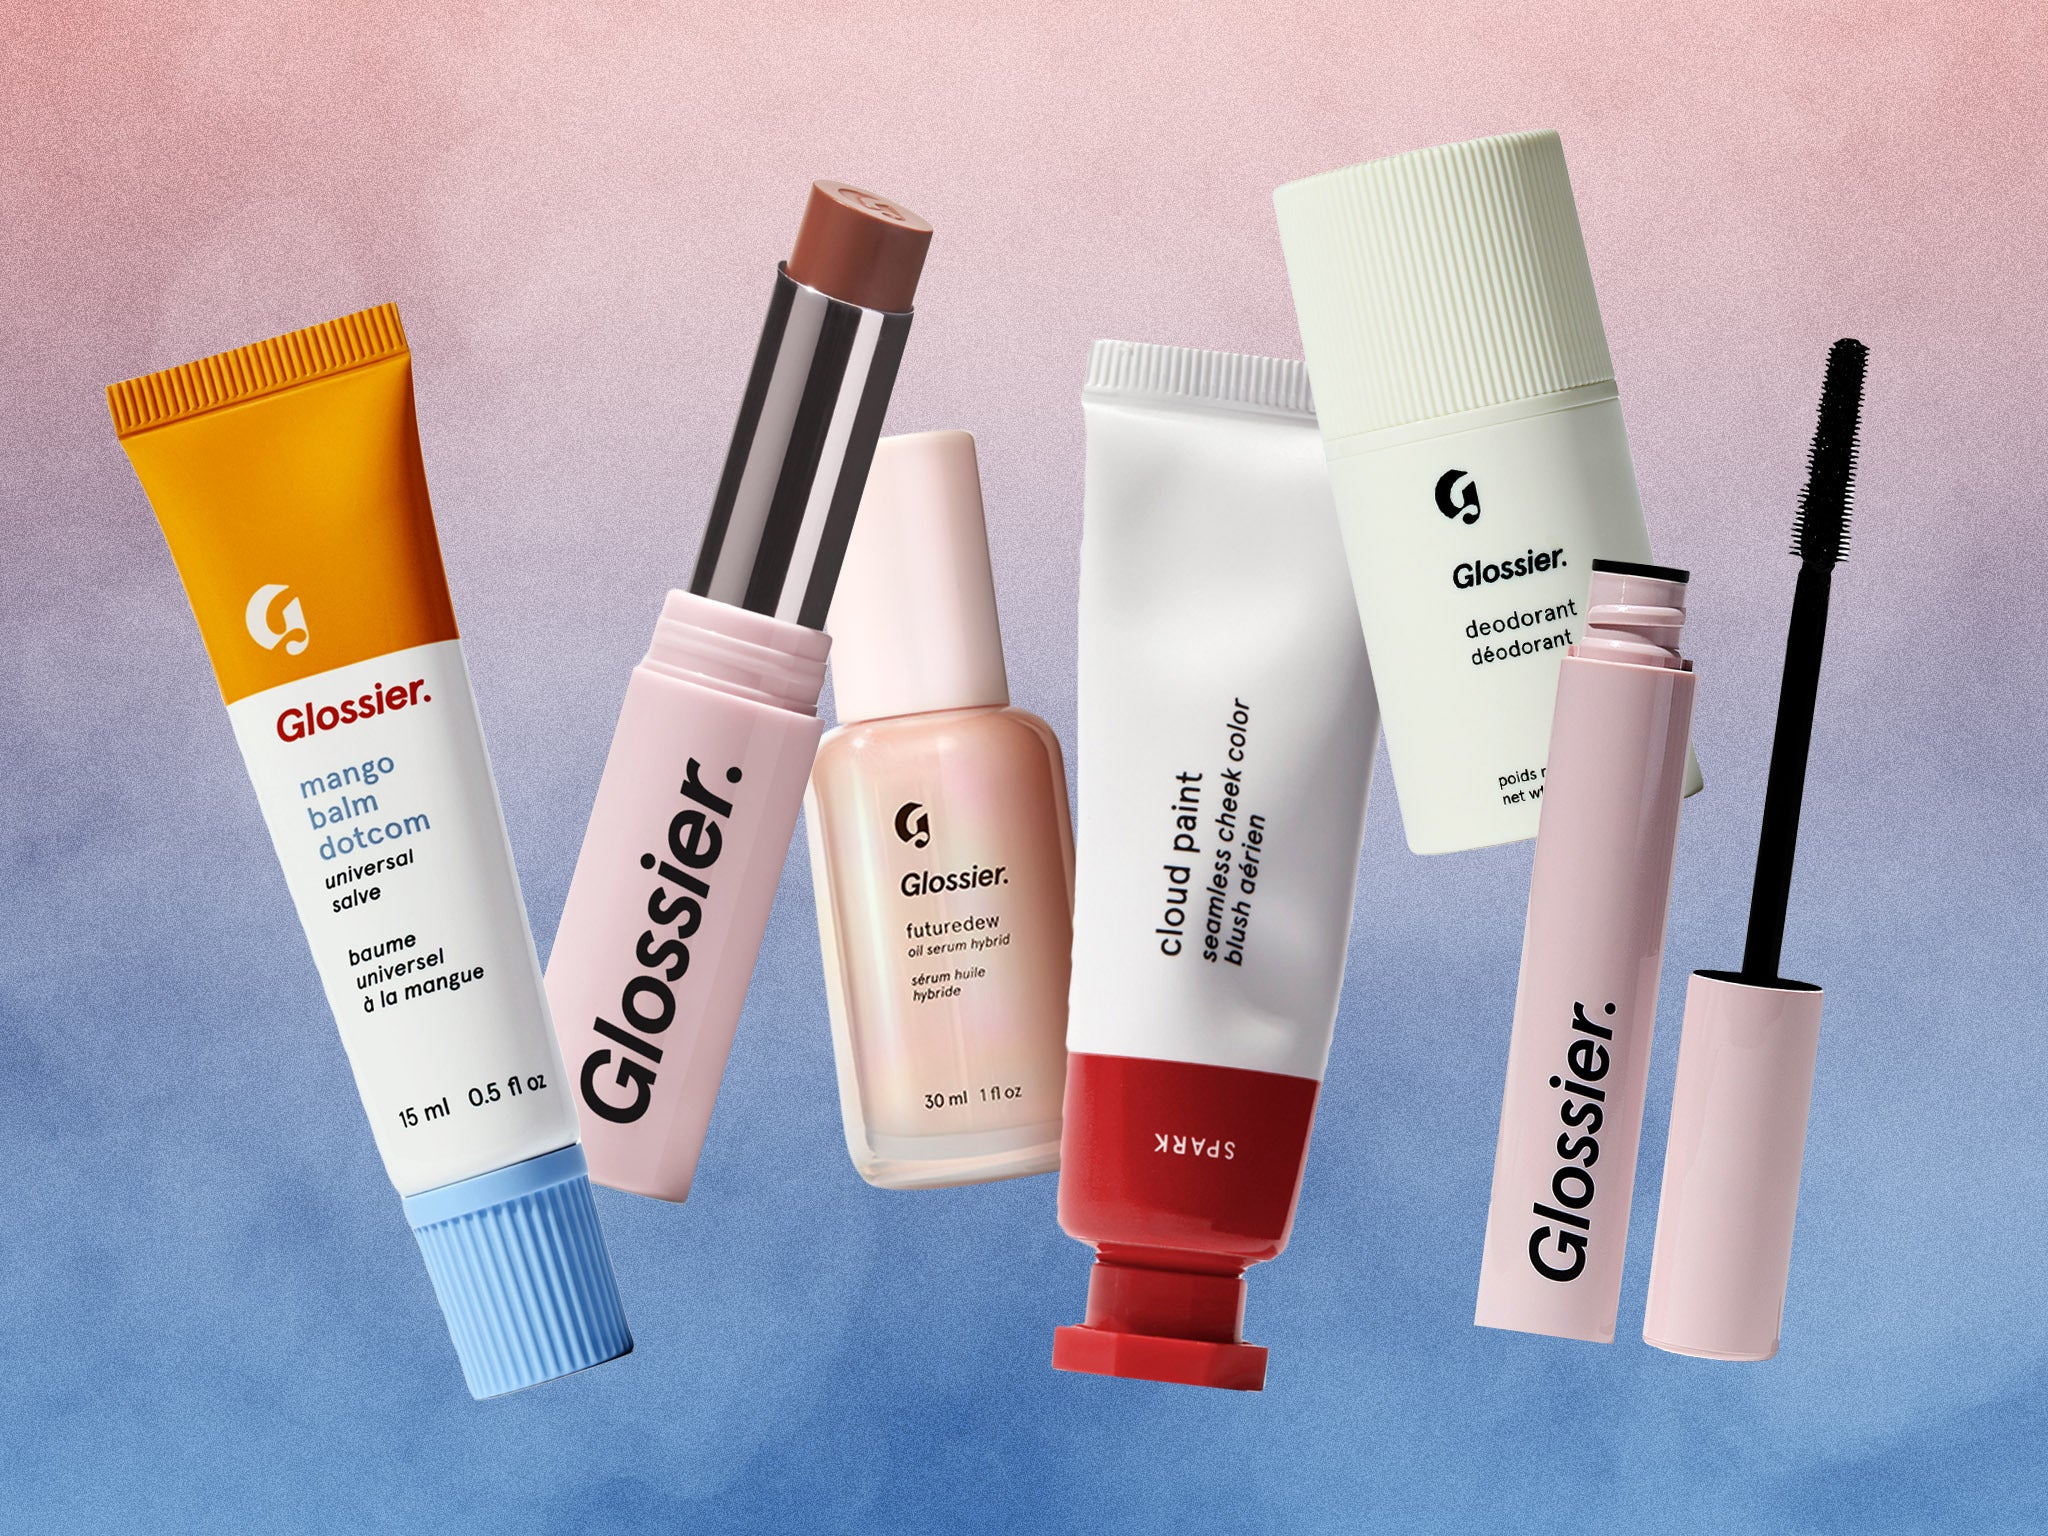 https://static.independent.co.uk/2023/05/04/11/glossier%20indybest.jpg